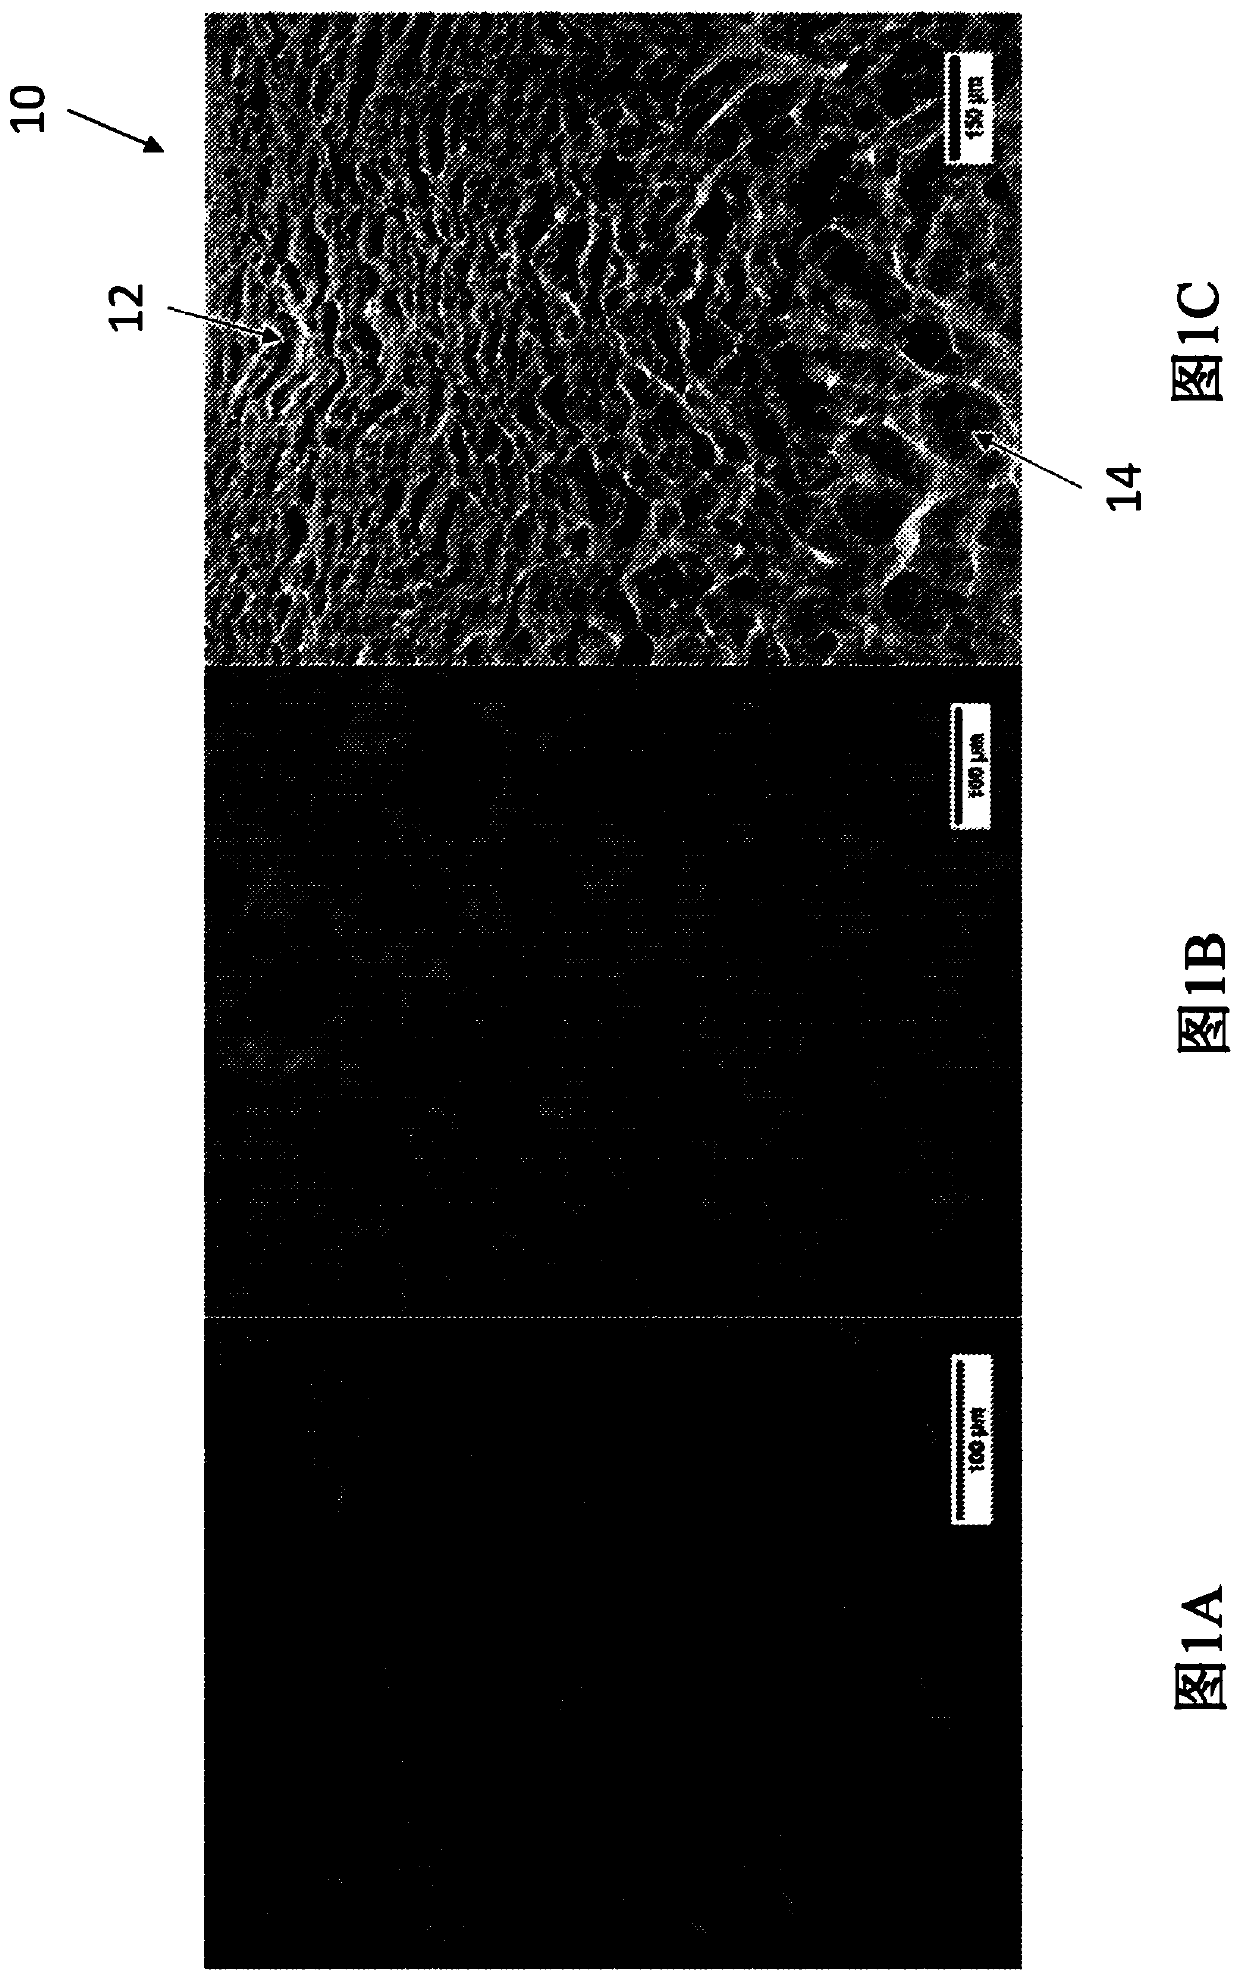 Graded porous scaffolds as immunomodulatory wound patches